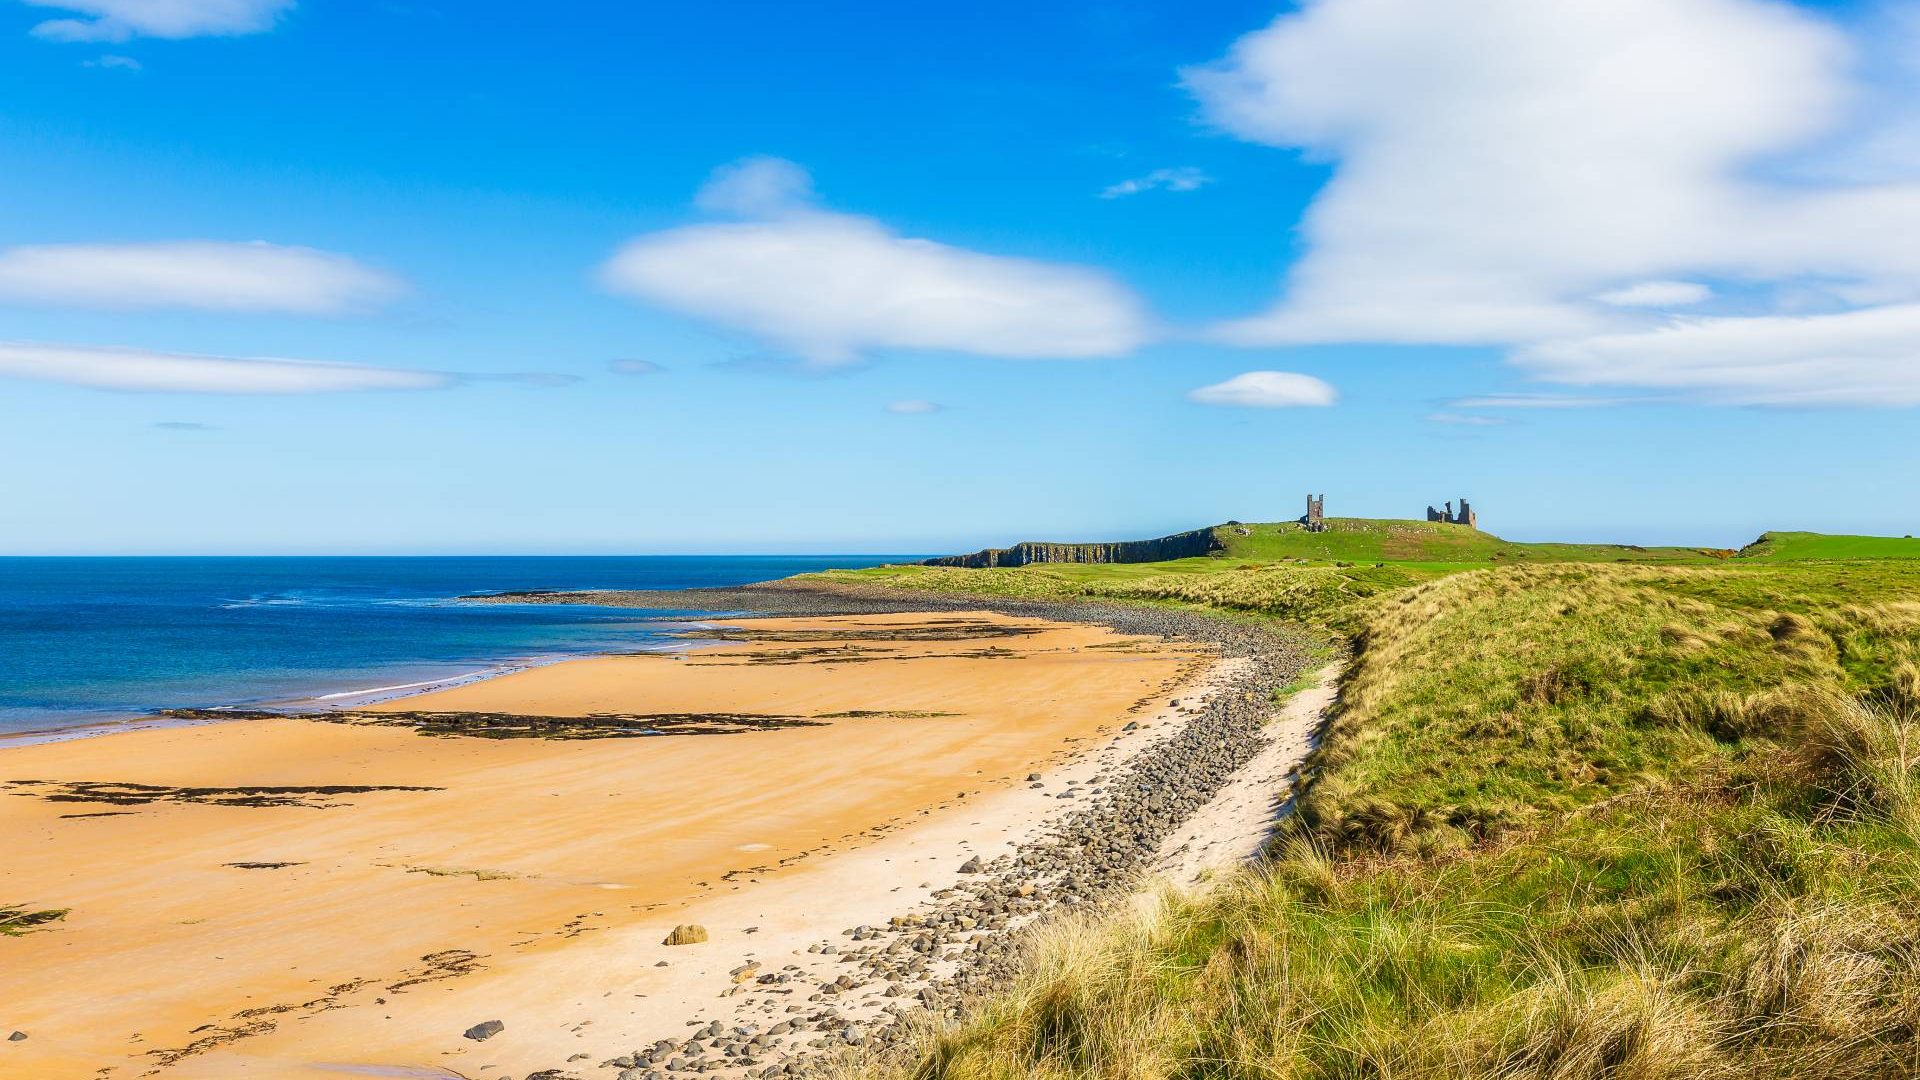 The Beach At Dunstanburg Castle In Northumberland, England